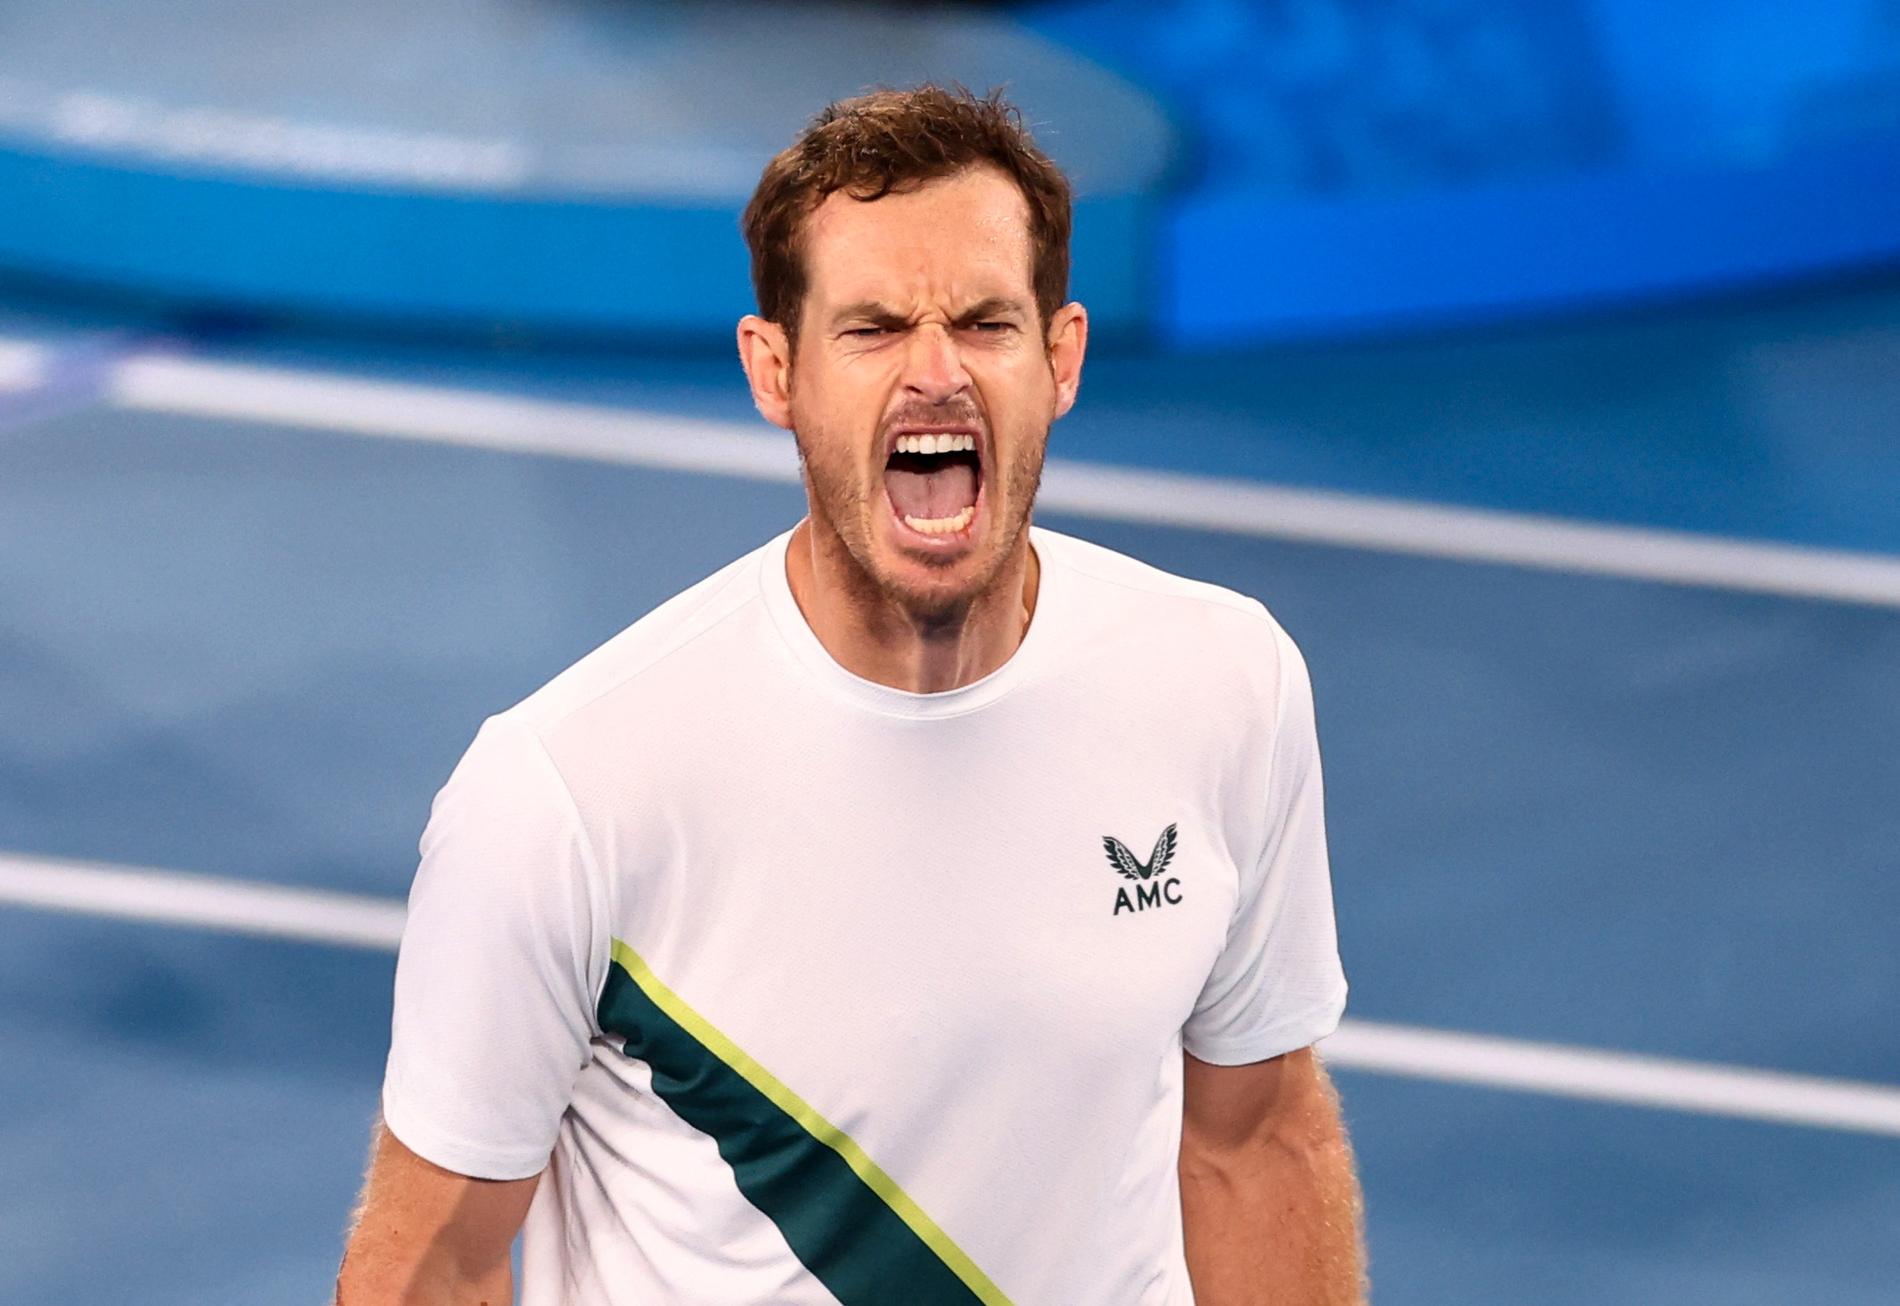 Andy Murray continues the Australian Open after nearly six hours of drama: – Unbelievable